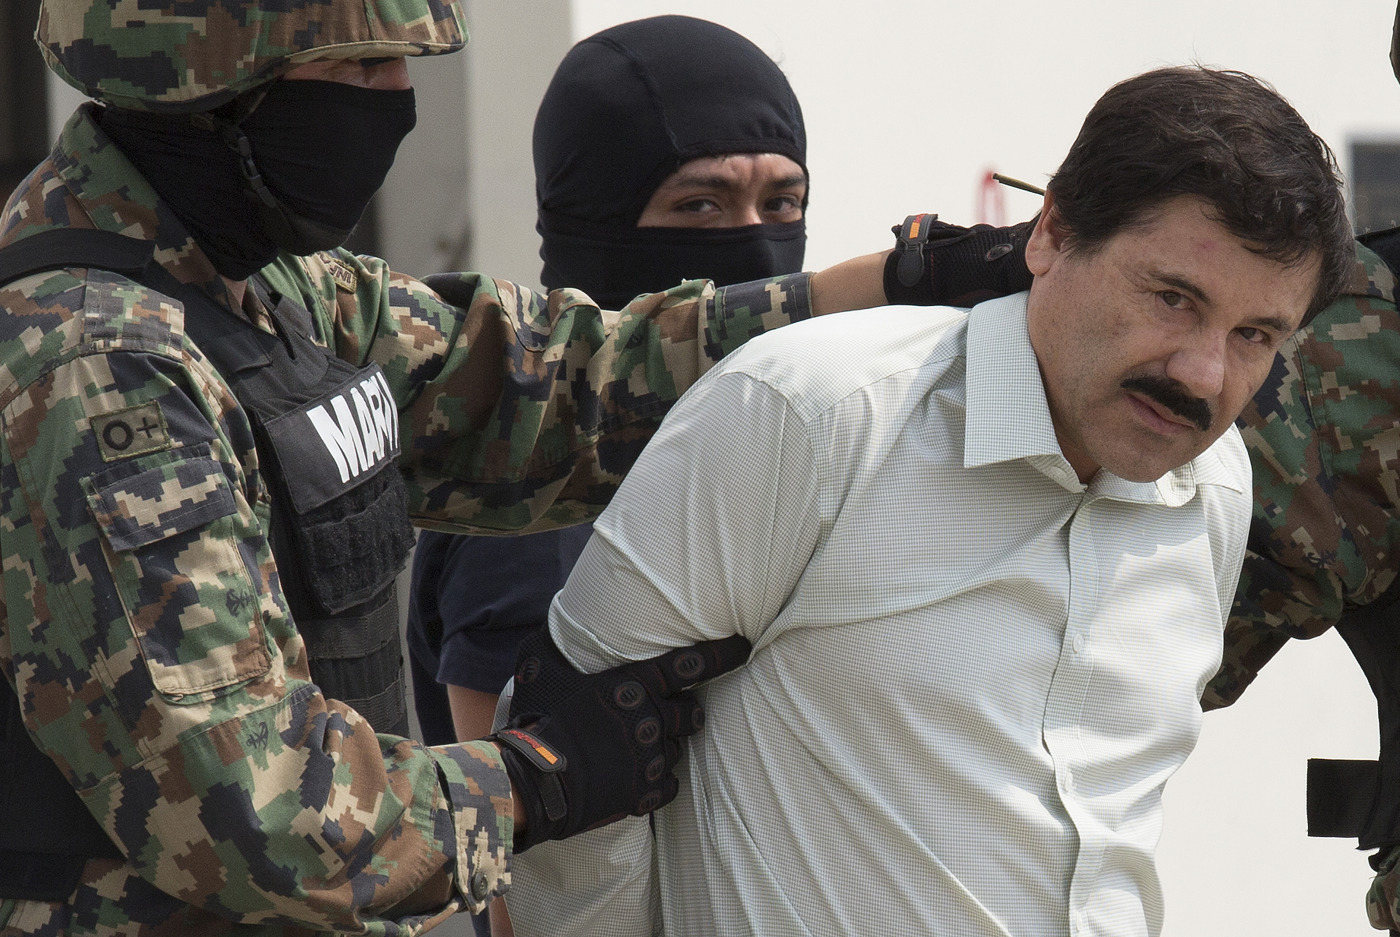 The drug trafficker Joaquín “El Chapo” Guzmán, guarded by members of Mexican navy, was arrested at a hotel in Mexico on Feb. 22, 2014